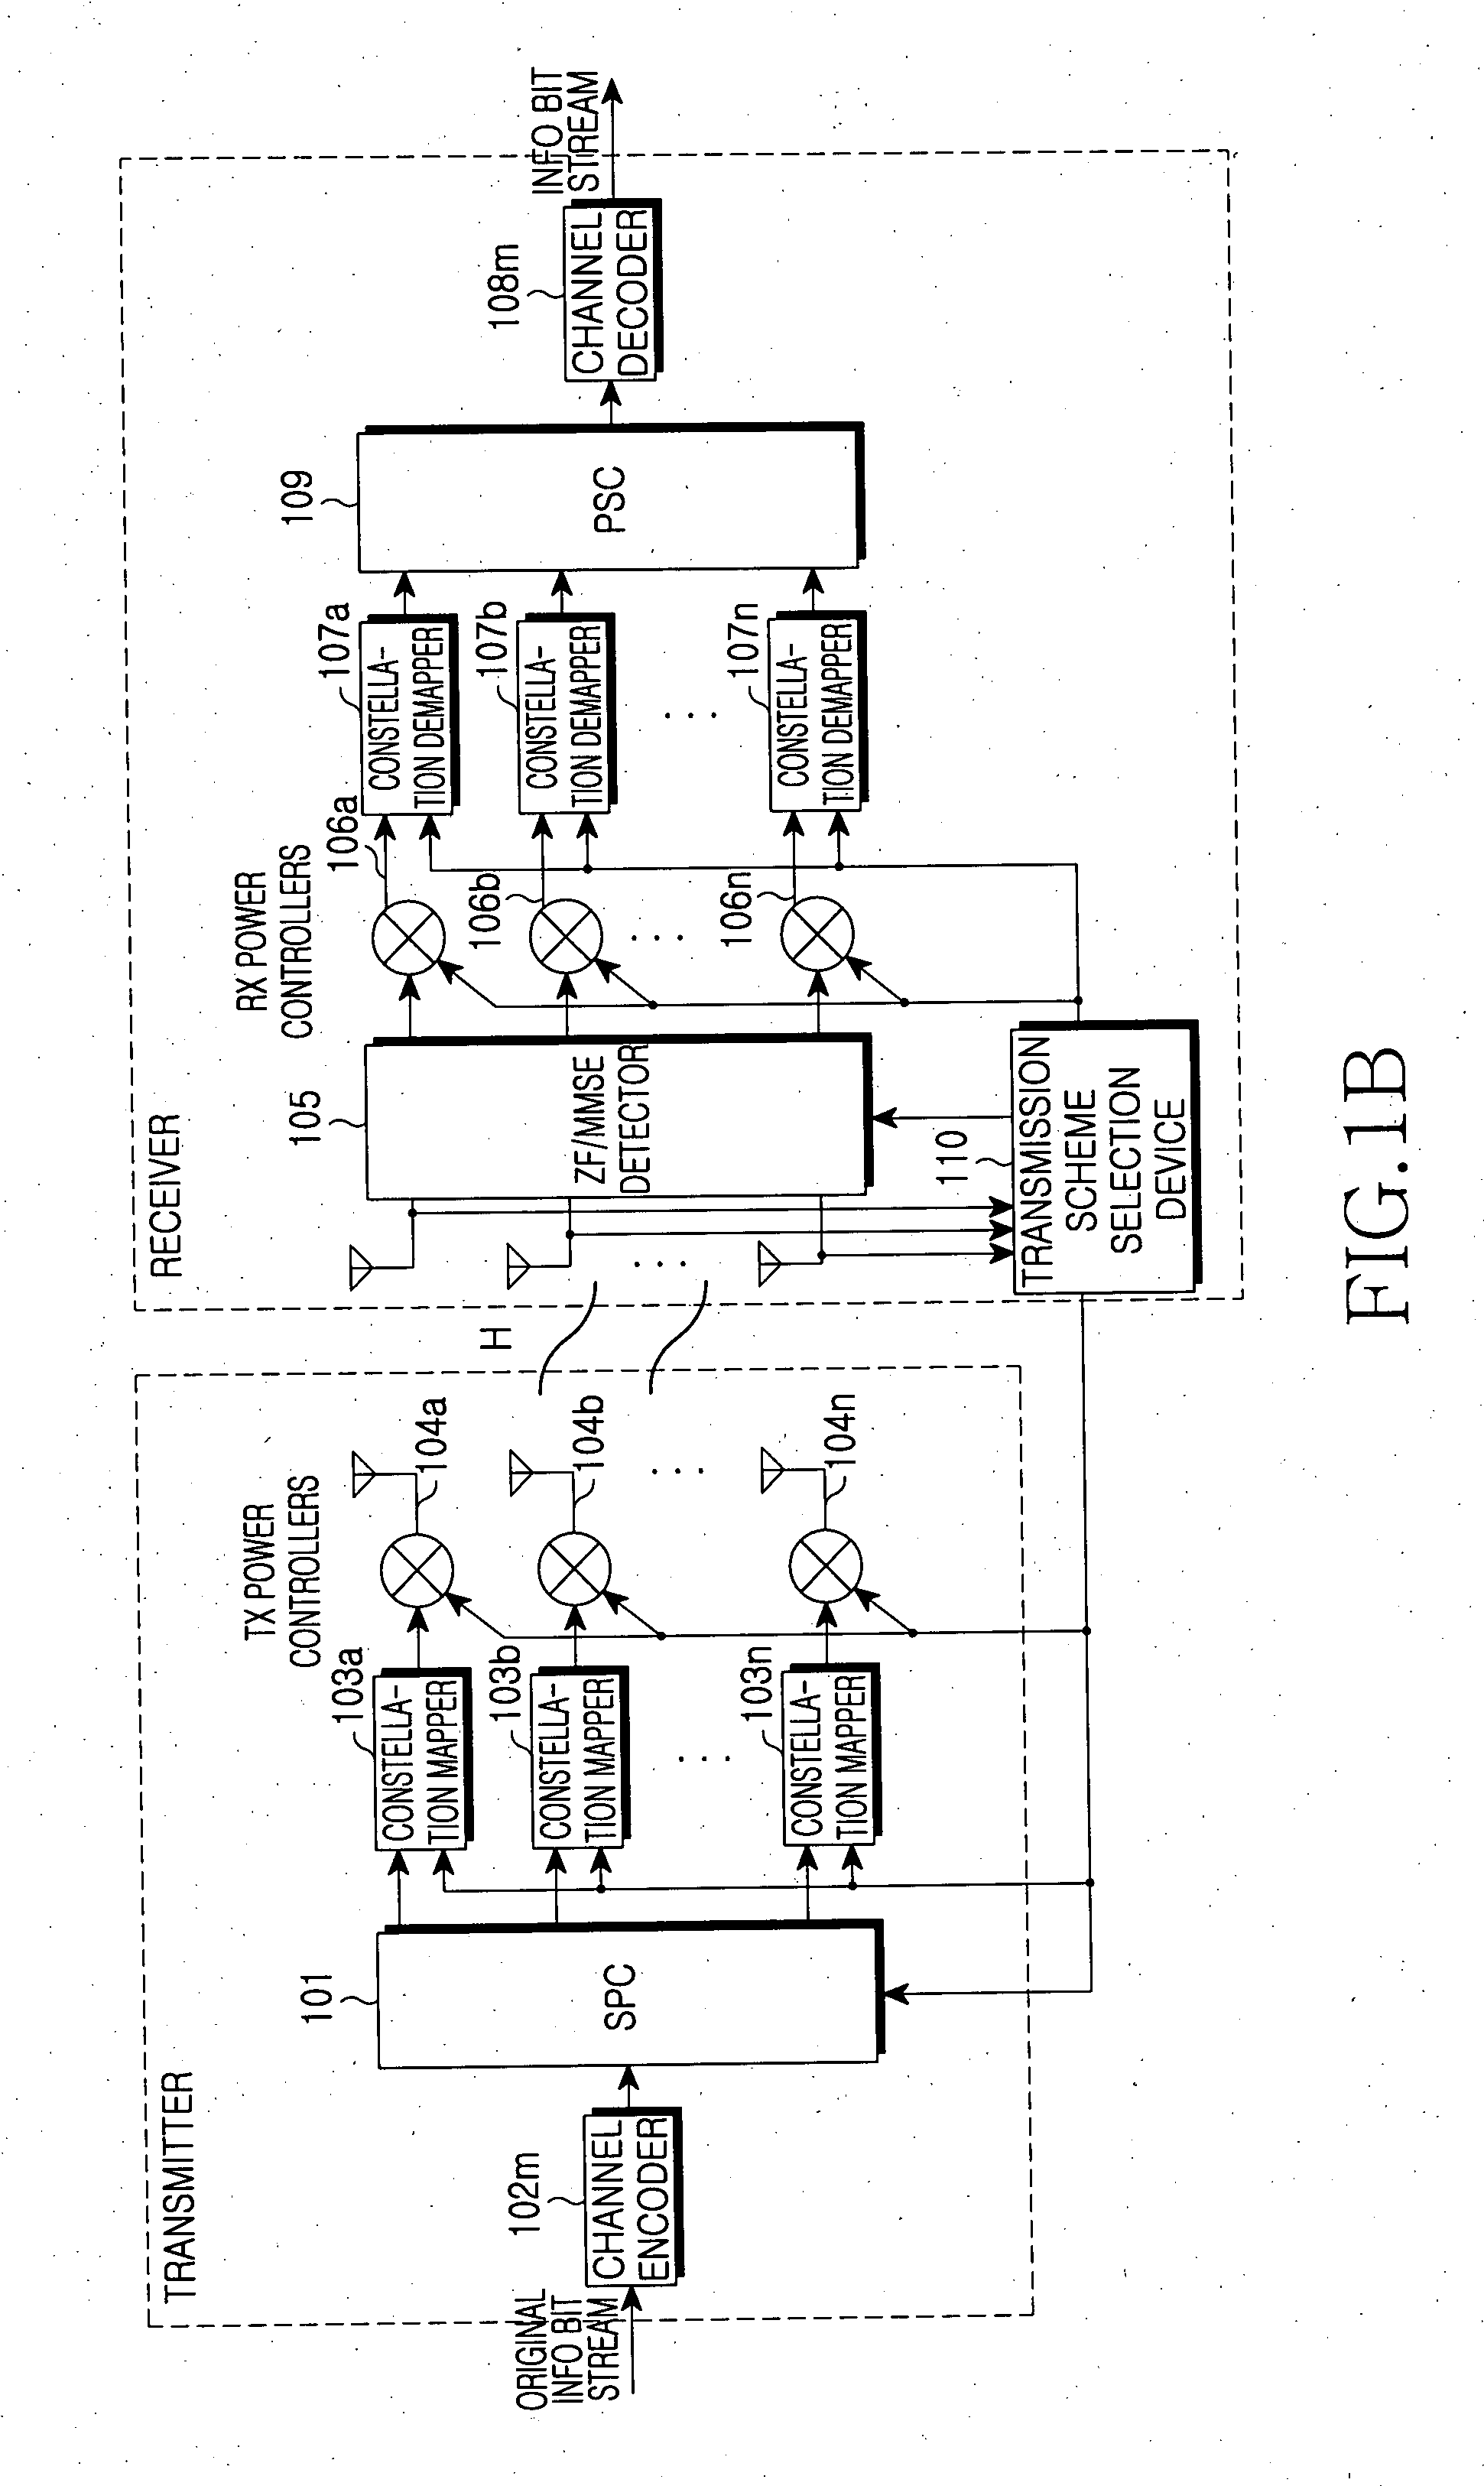 Self-adaptive MIMO transmission/reception system and method